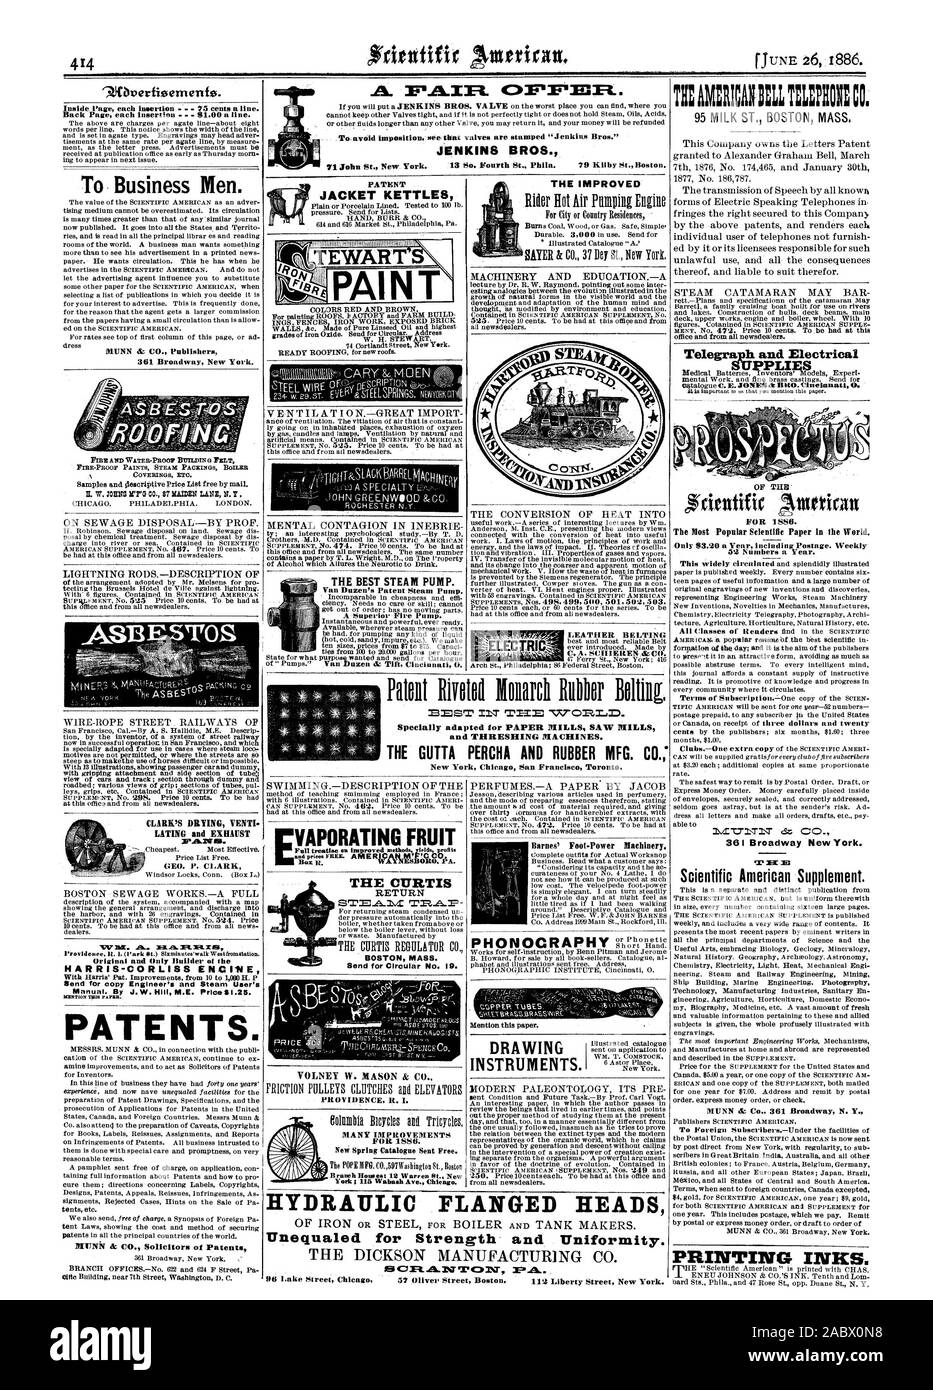 PHONOCRAPHY Mention this paper. INSTRUMENTS. PATENT JACKET KETTLES and THRESHING MACHINES. THE GUTTA PERCHA AND RUBBER MFG. CO.: New York Chicag San Francisc Toronto. HYDRAULIC FLANGED HEADS Unequaled for Strength and Uniformity. THE DICKSON MANUFACTURING CO., scientific american, 1886-06-26 Stock Photo